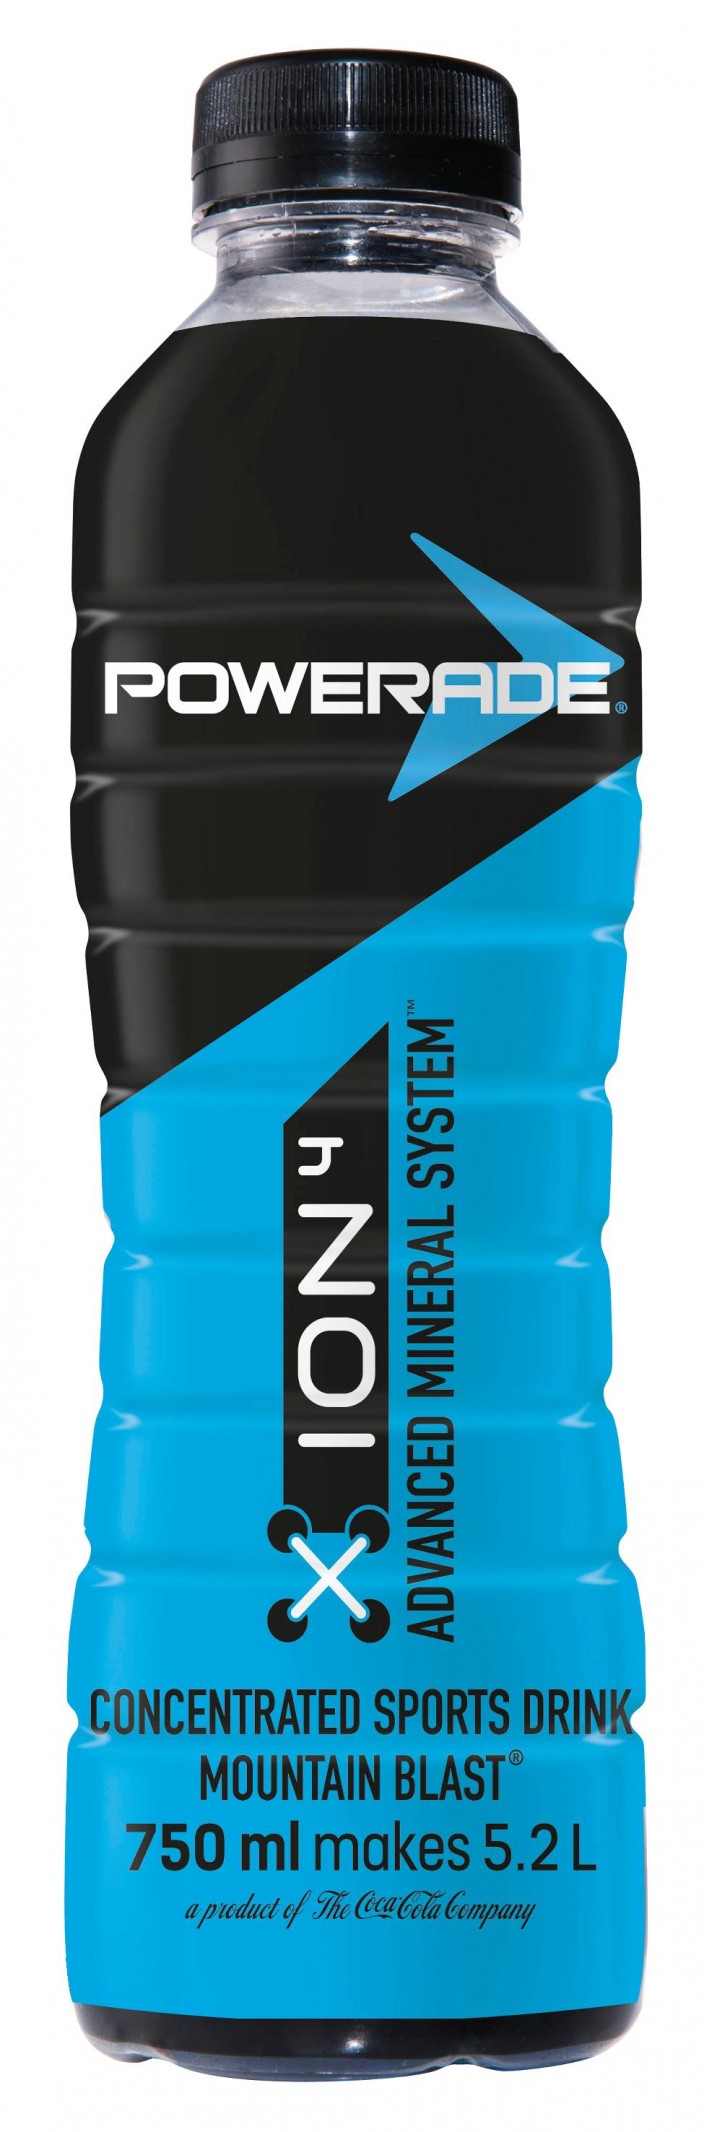 WHEN WORKING UP A SWEATGRAB THE NEW POWERADE ION4 15.co.za Rugby